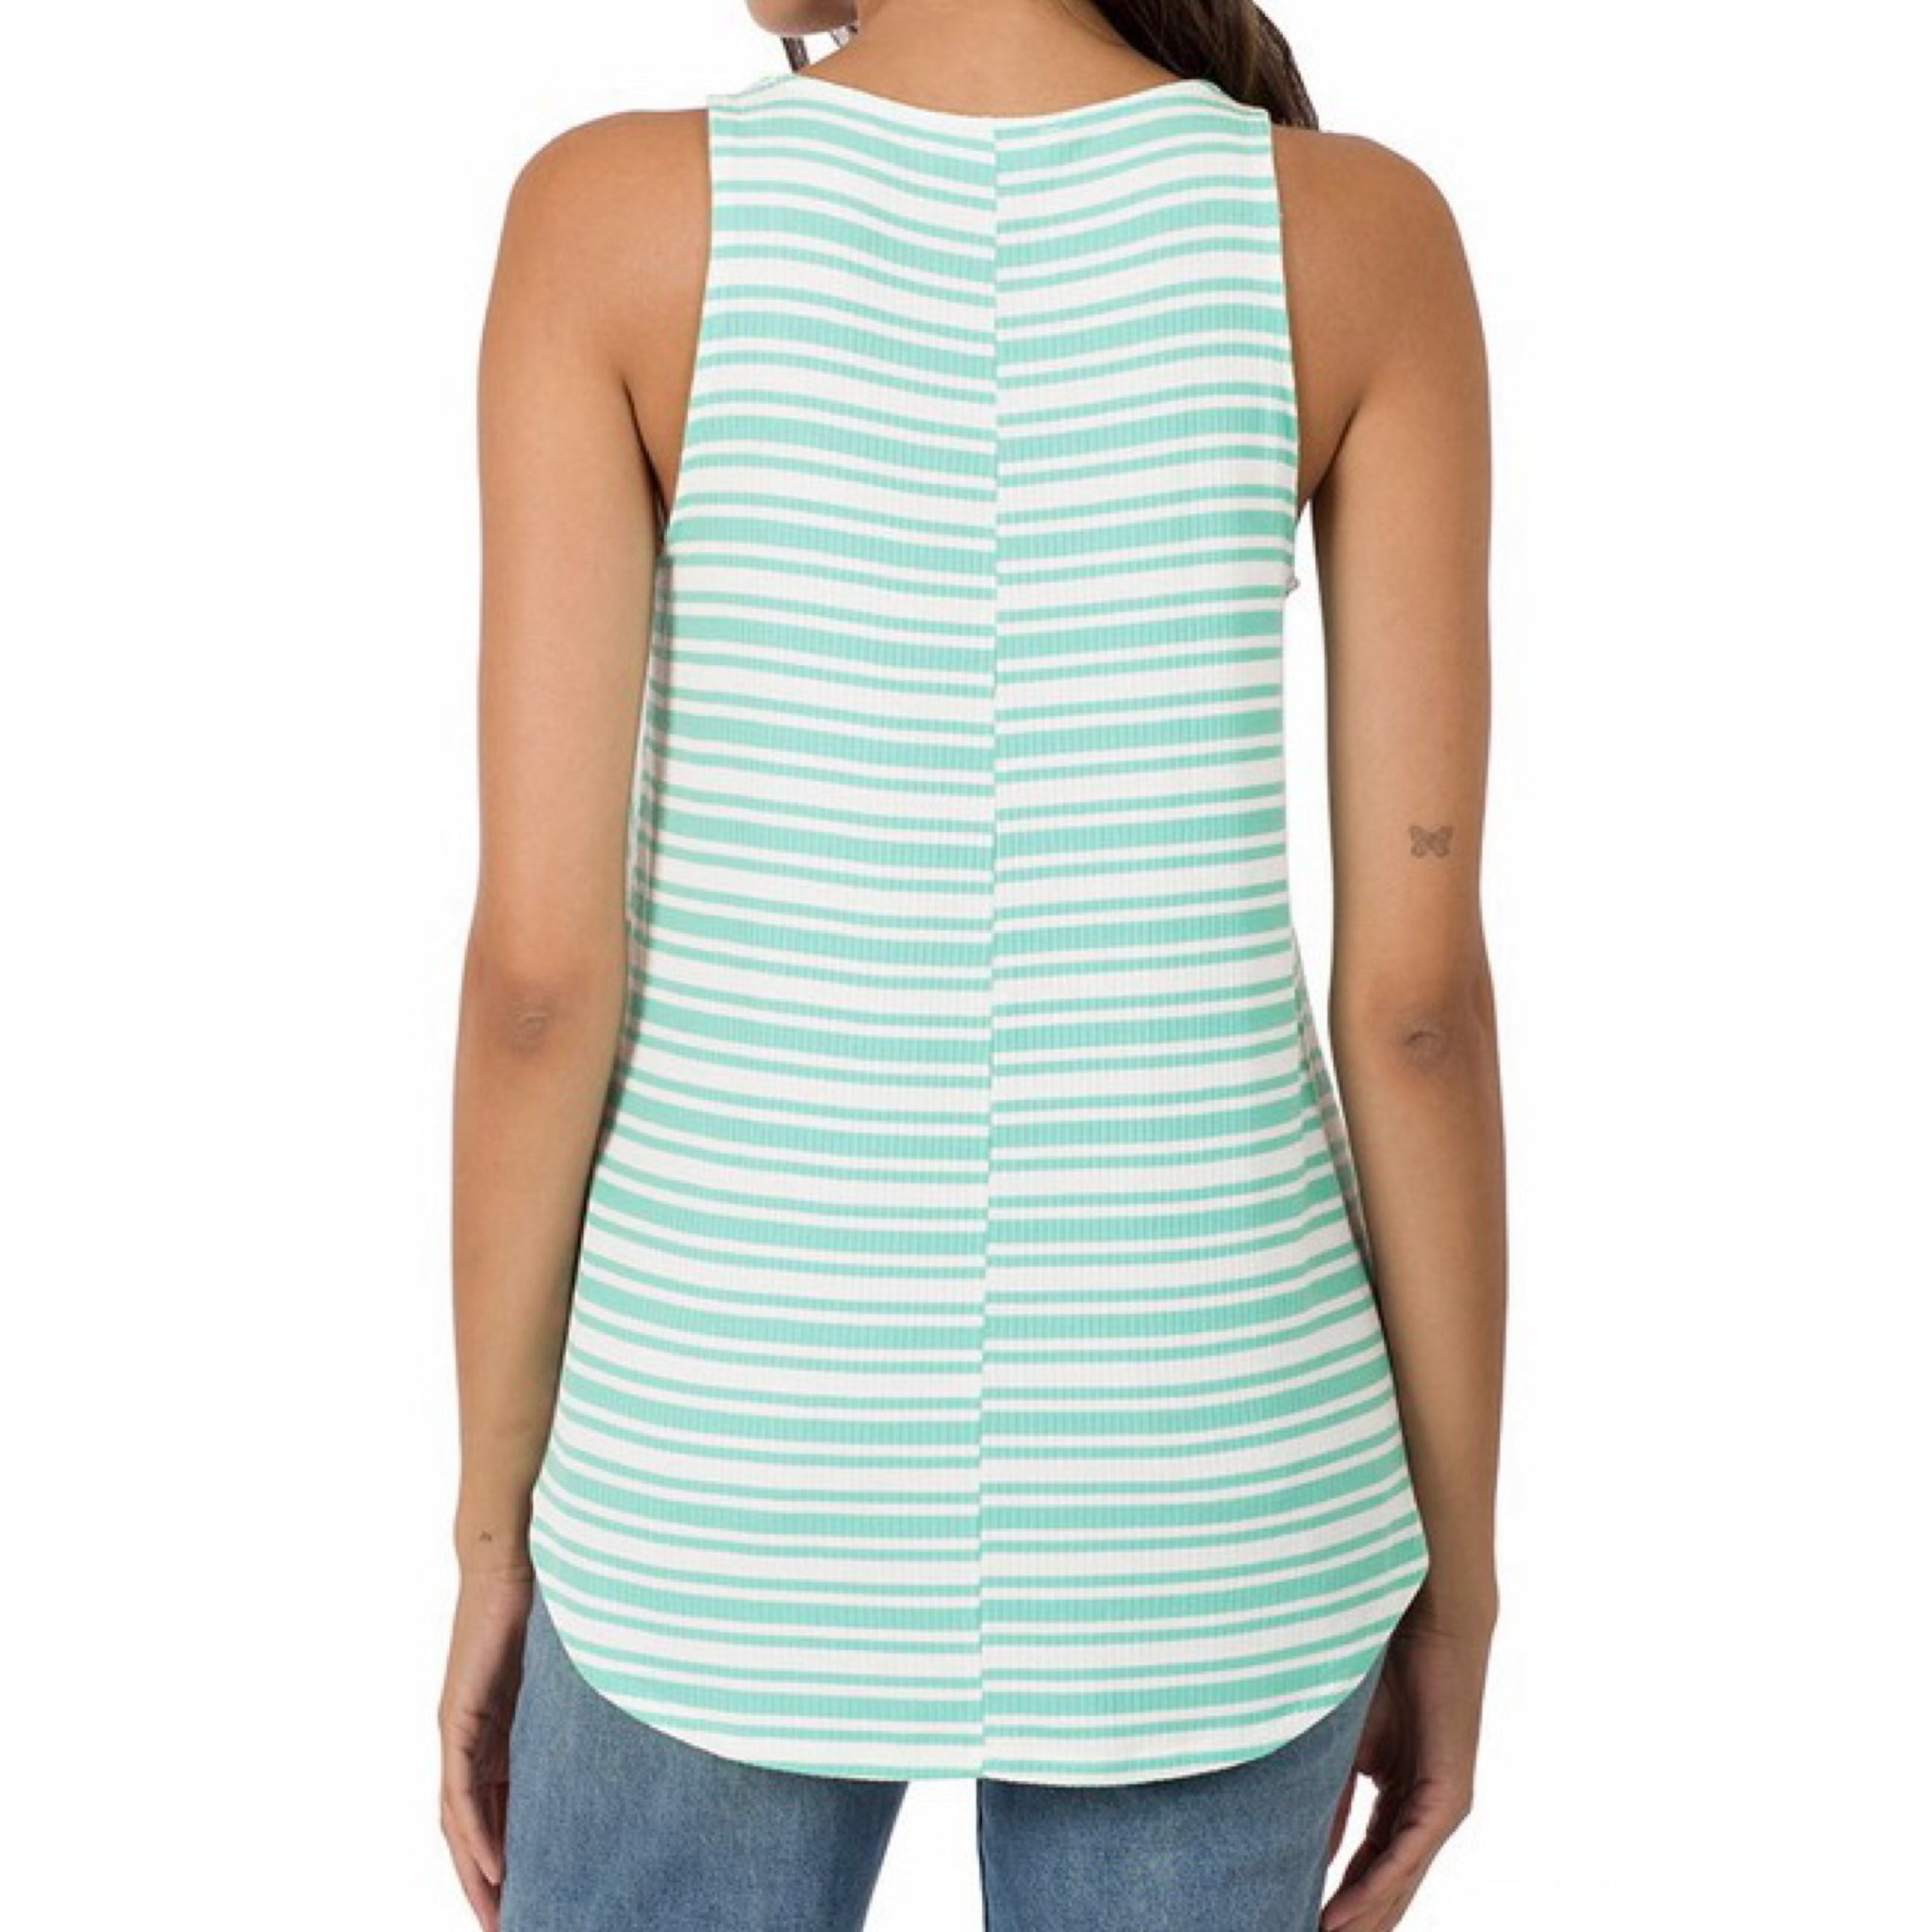 "Level Up" Ribbed Striped Scoop Neck Summer Floaty Tank Top Tunic Pink S/M/L/XL